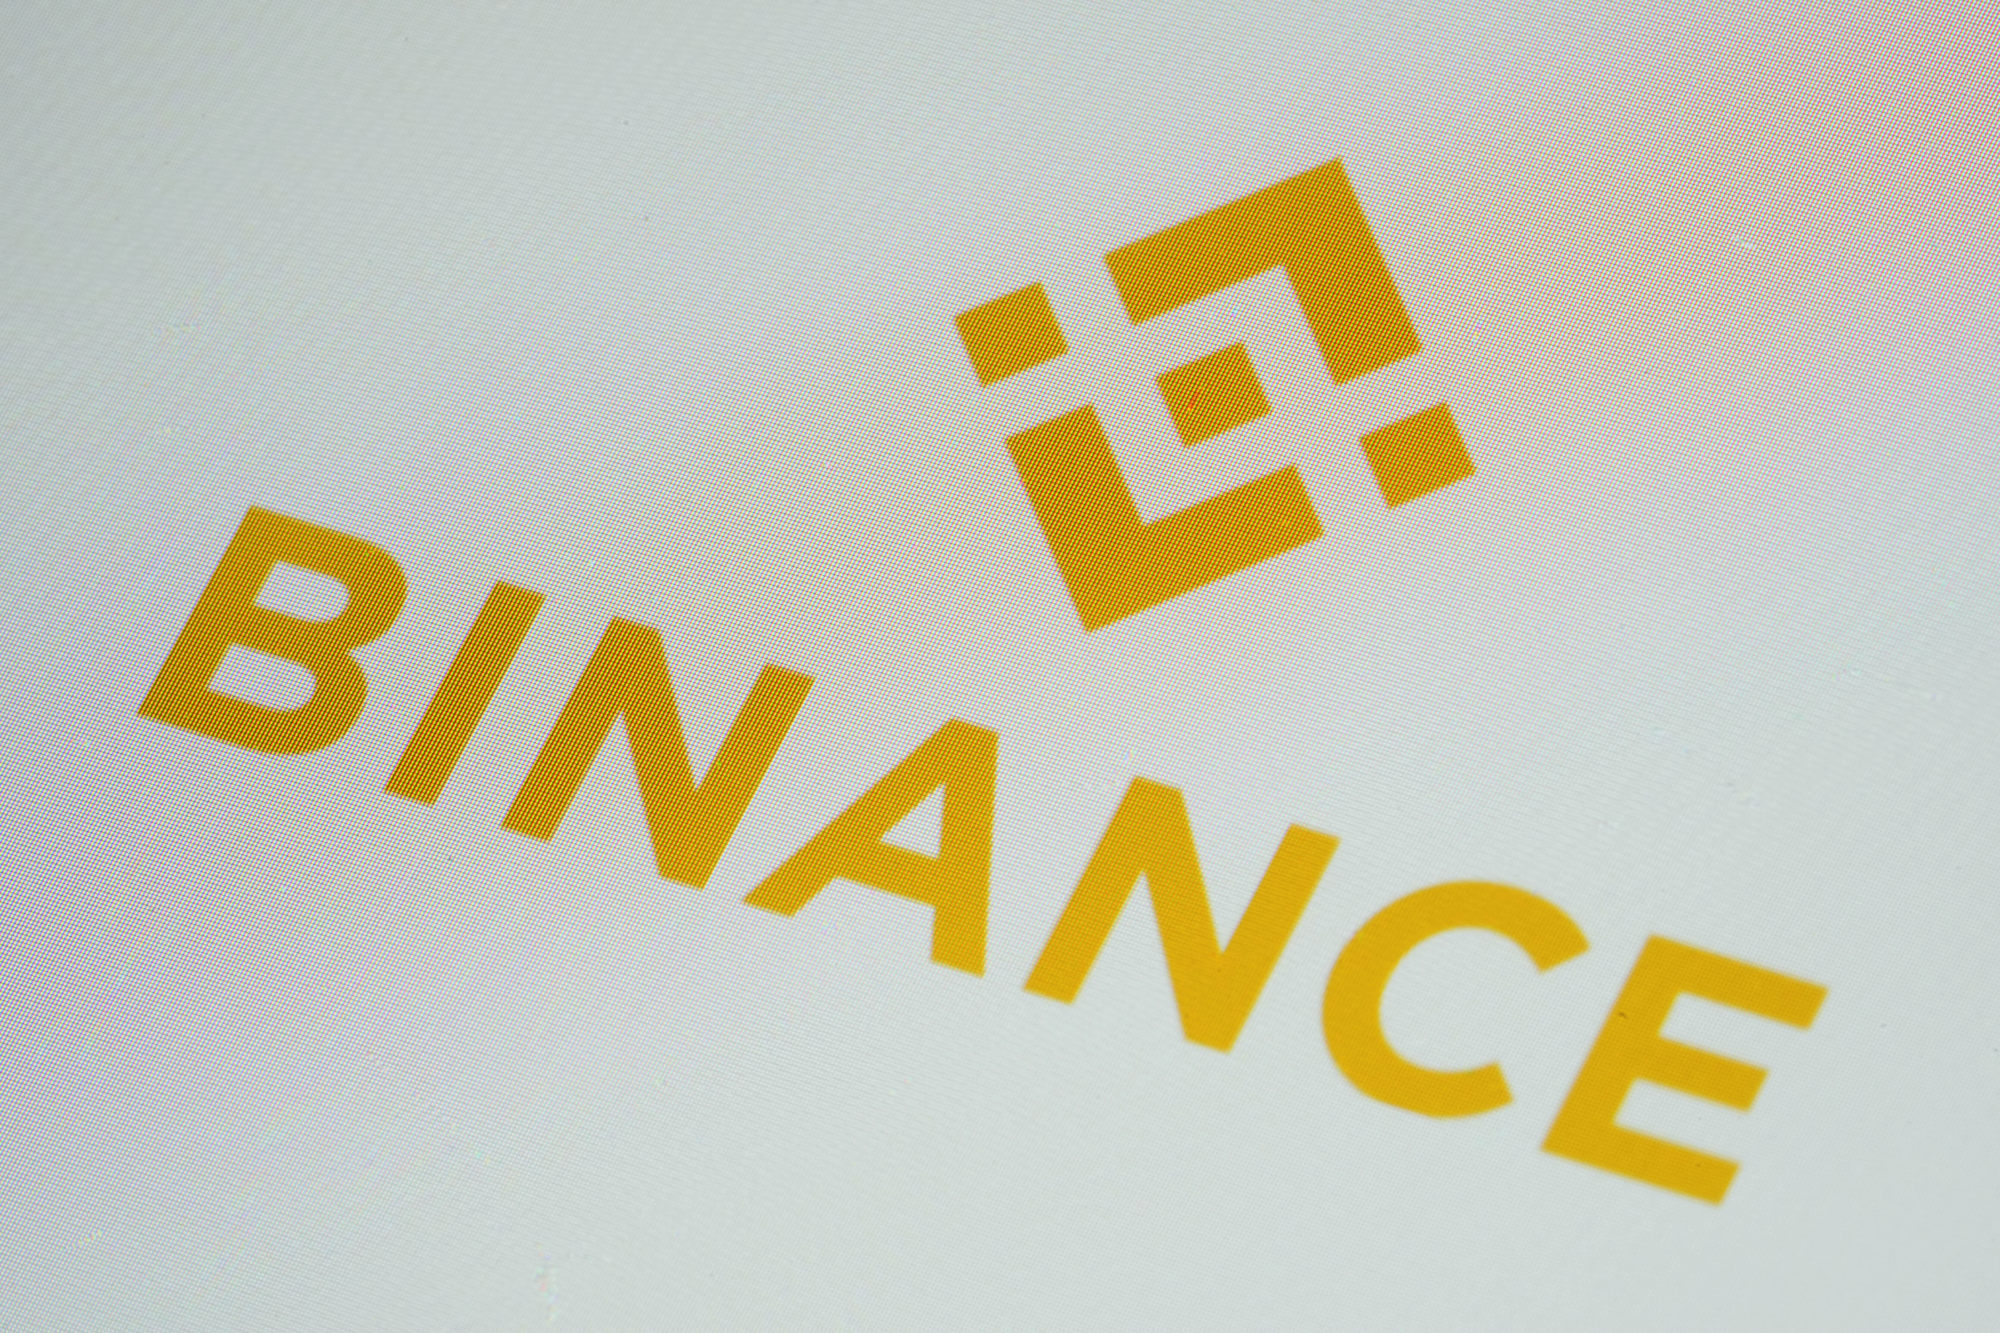 binance ceo changpeng zhao agrees to plead guilty, pay us$50 million fine in us investigation